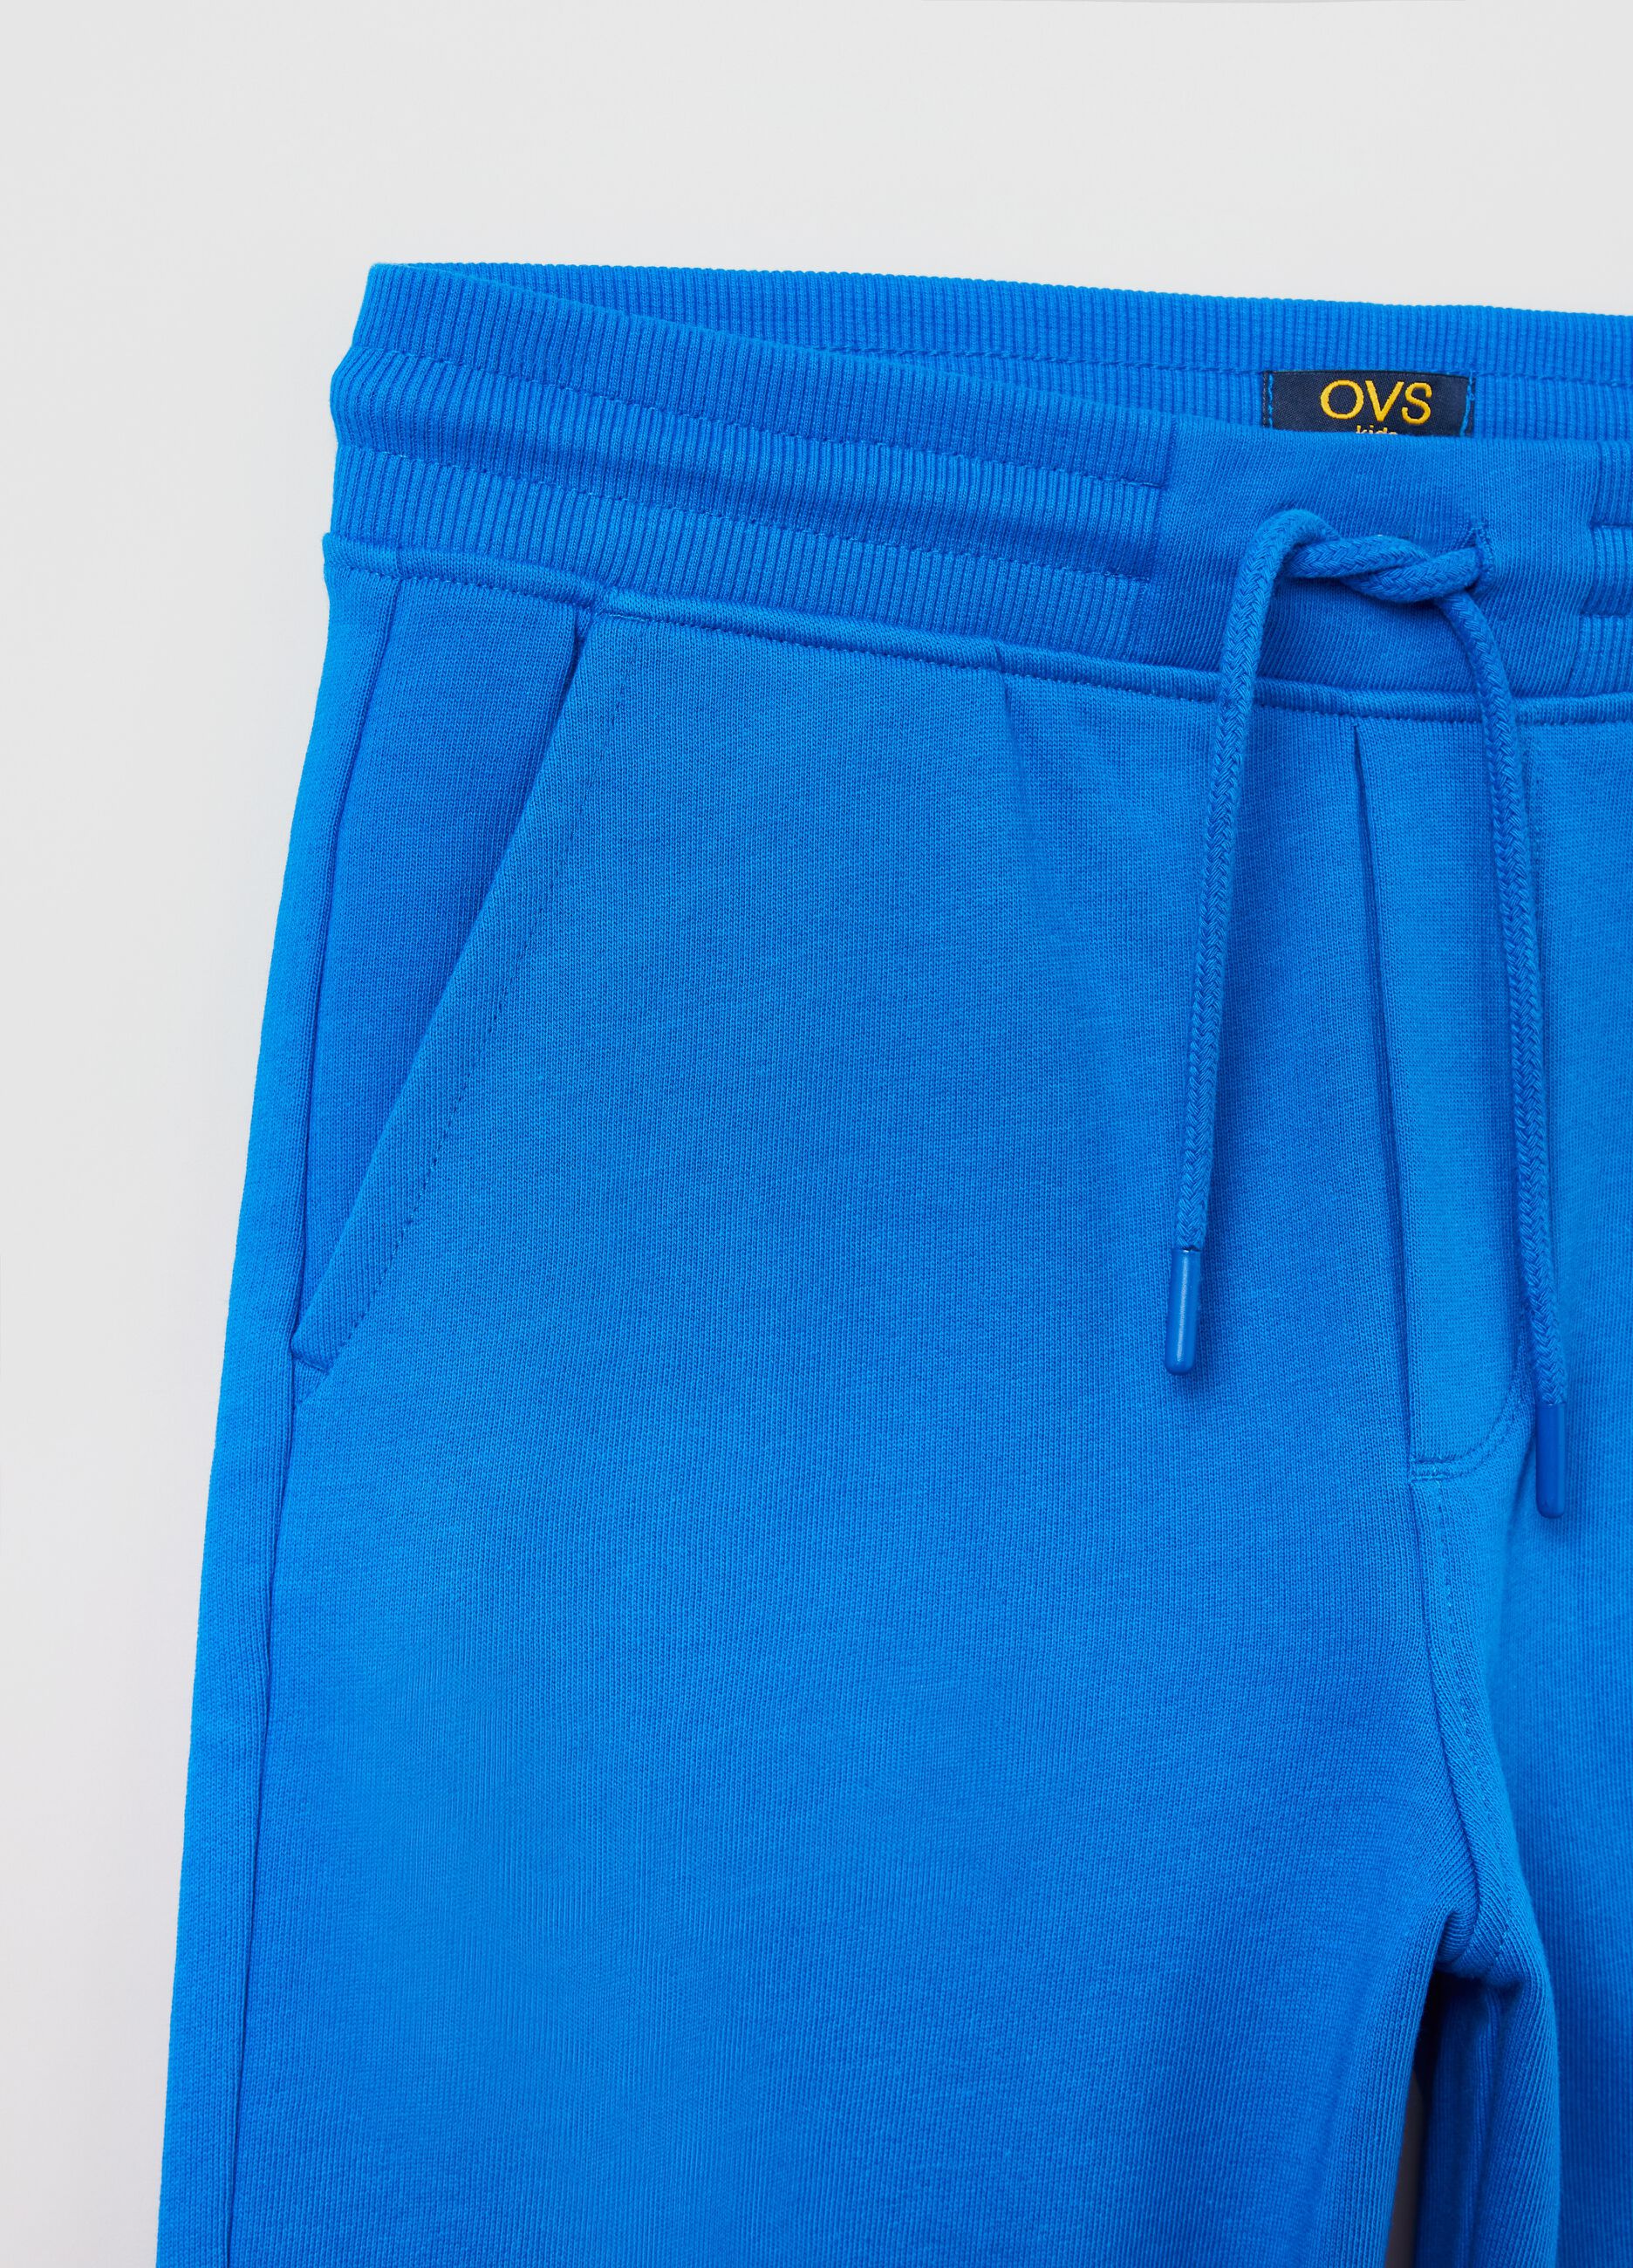 Fitness shorts with drawstring